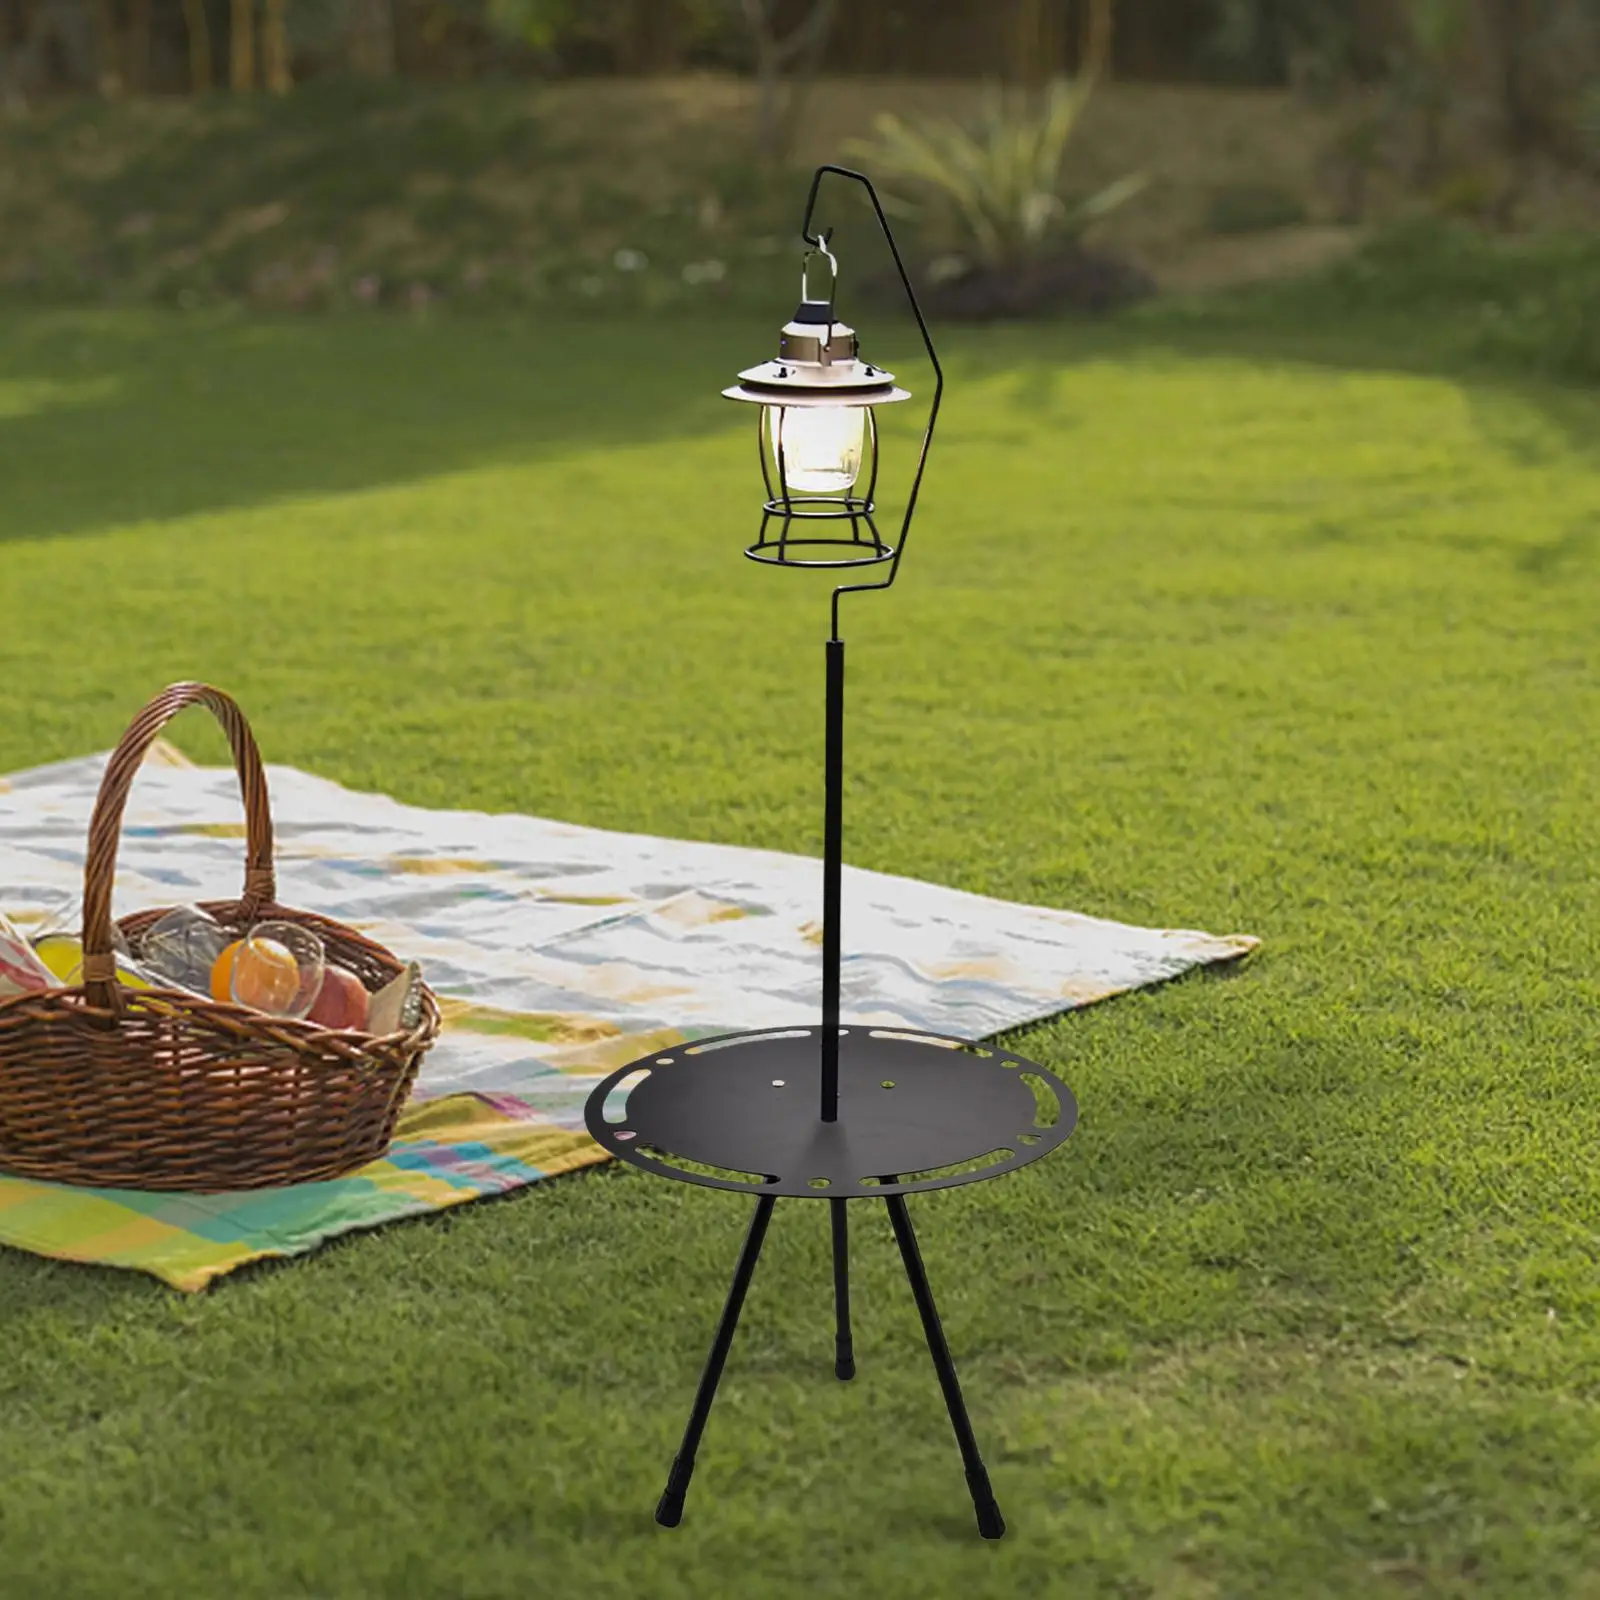 Portable Table Round Easy to Lift Lightweight Retractable Legs Camping Side Table Tea Table for Travel Garden Equipment